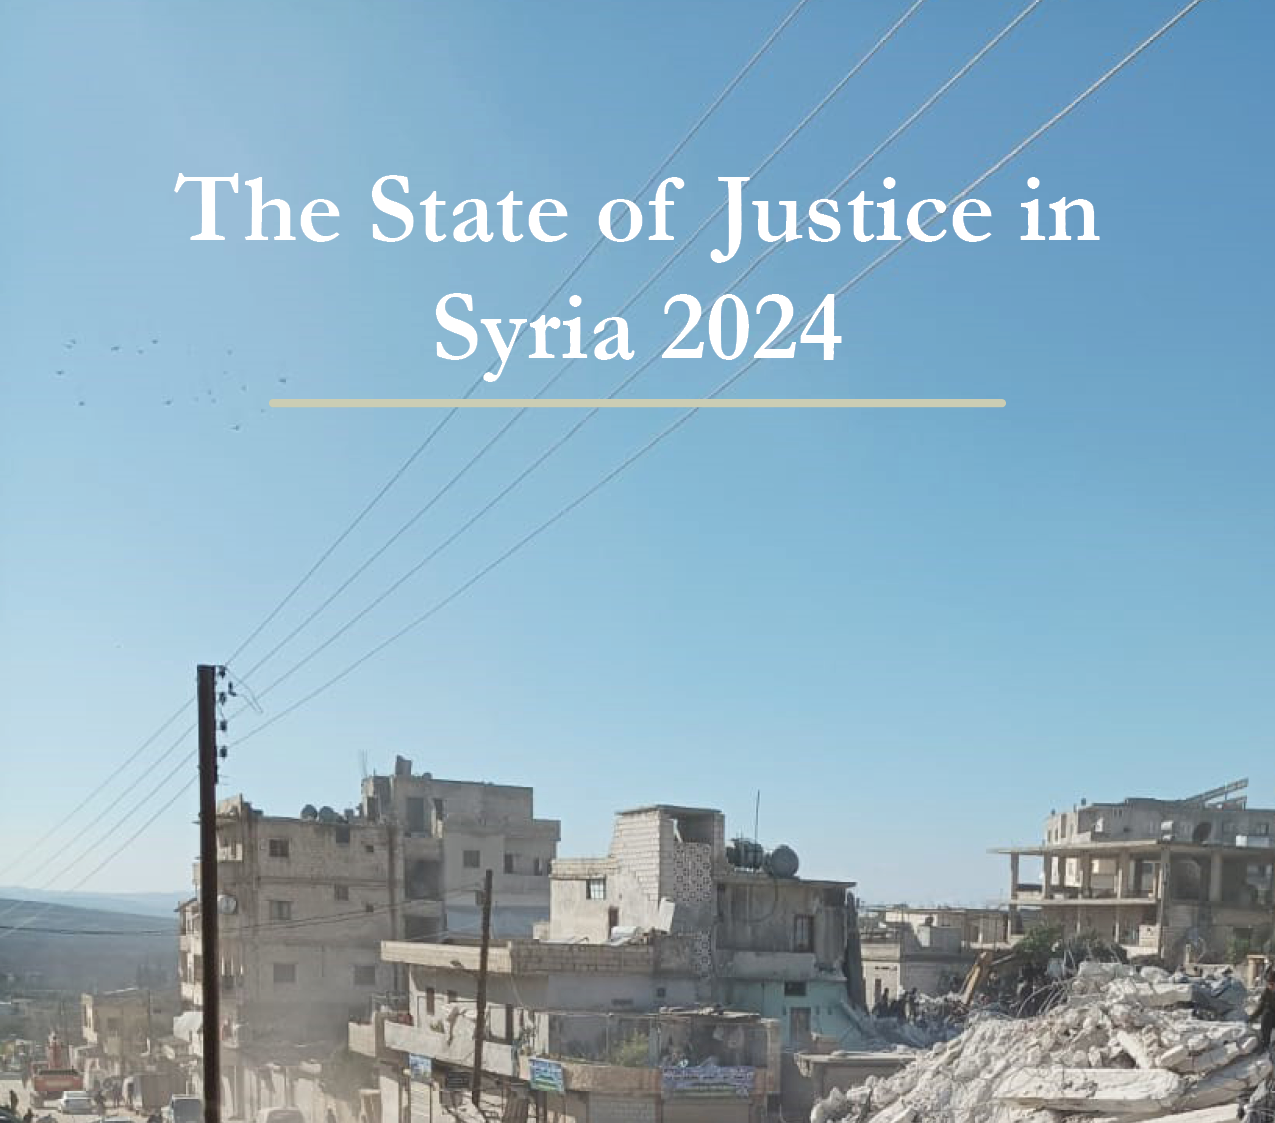 The State of Justice in Syria 2024